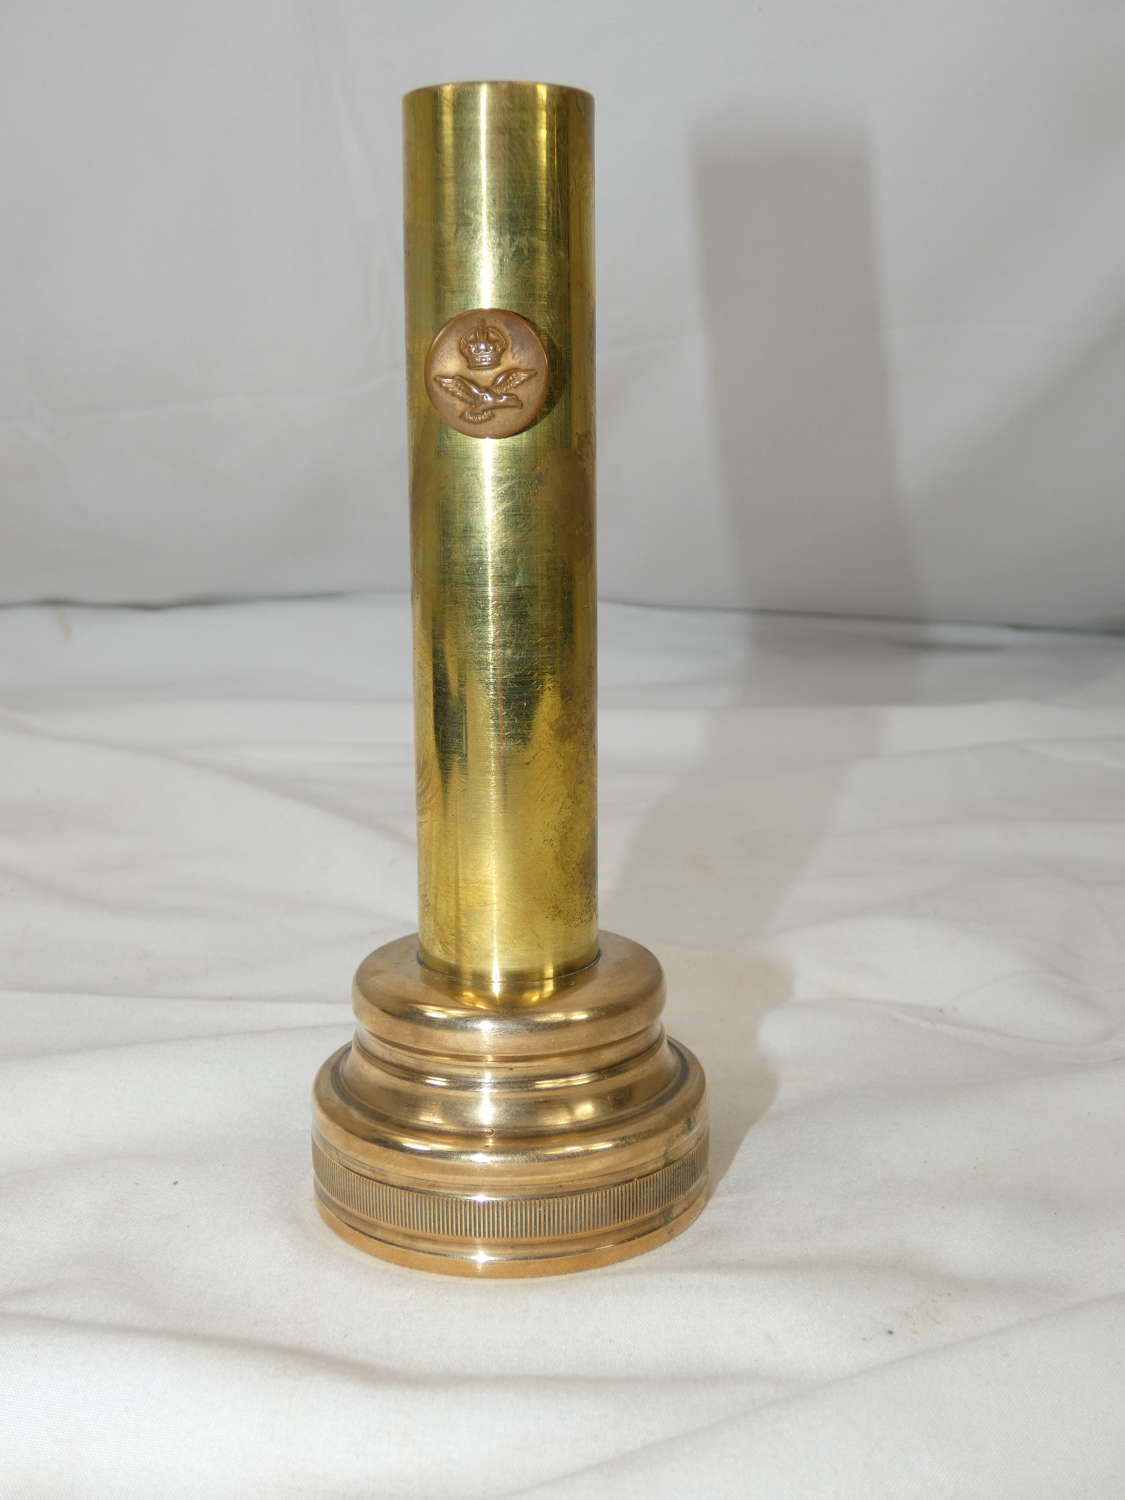 WW2 British R.A.F. Trench Art Candle Holder